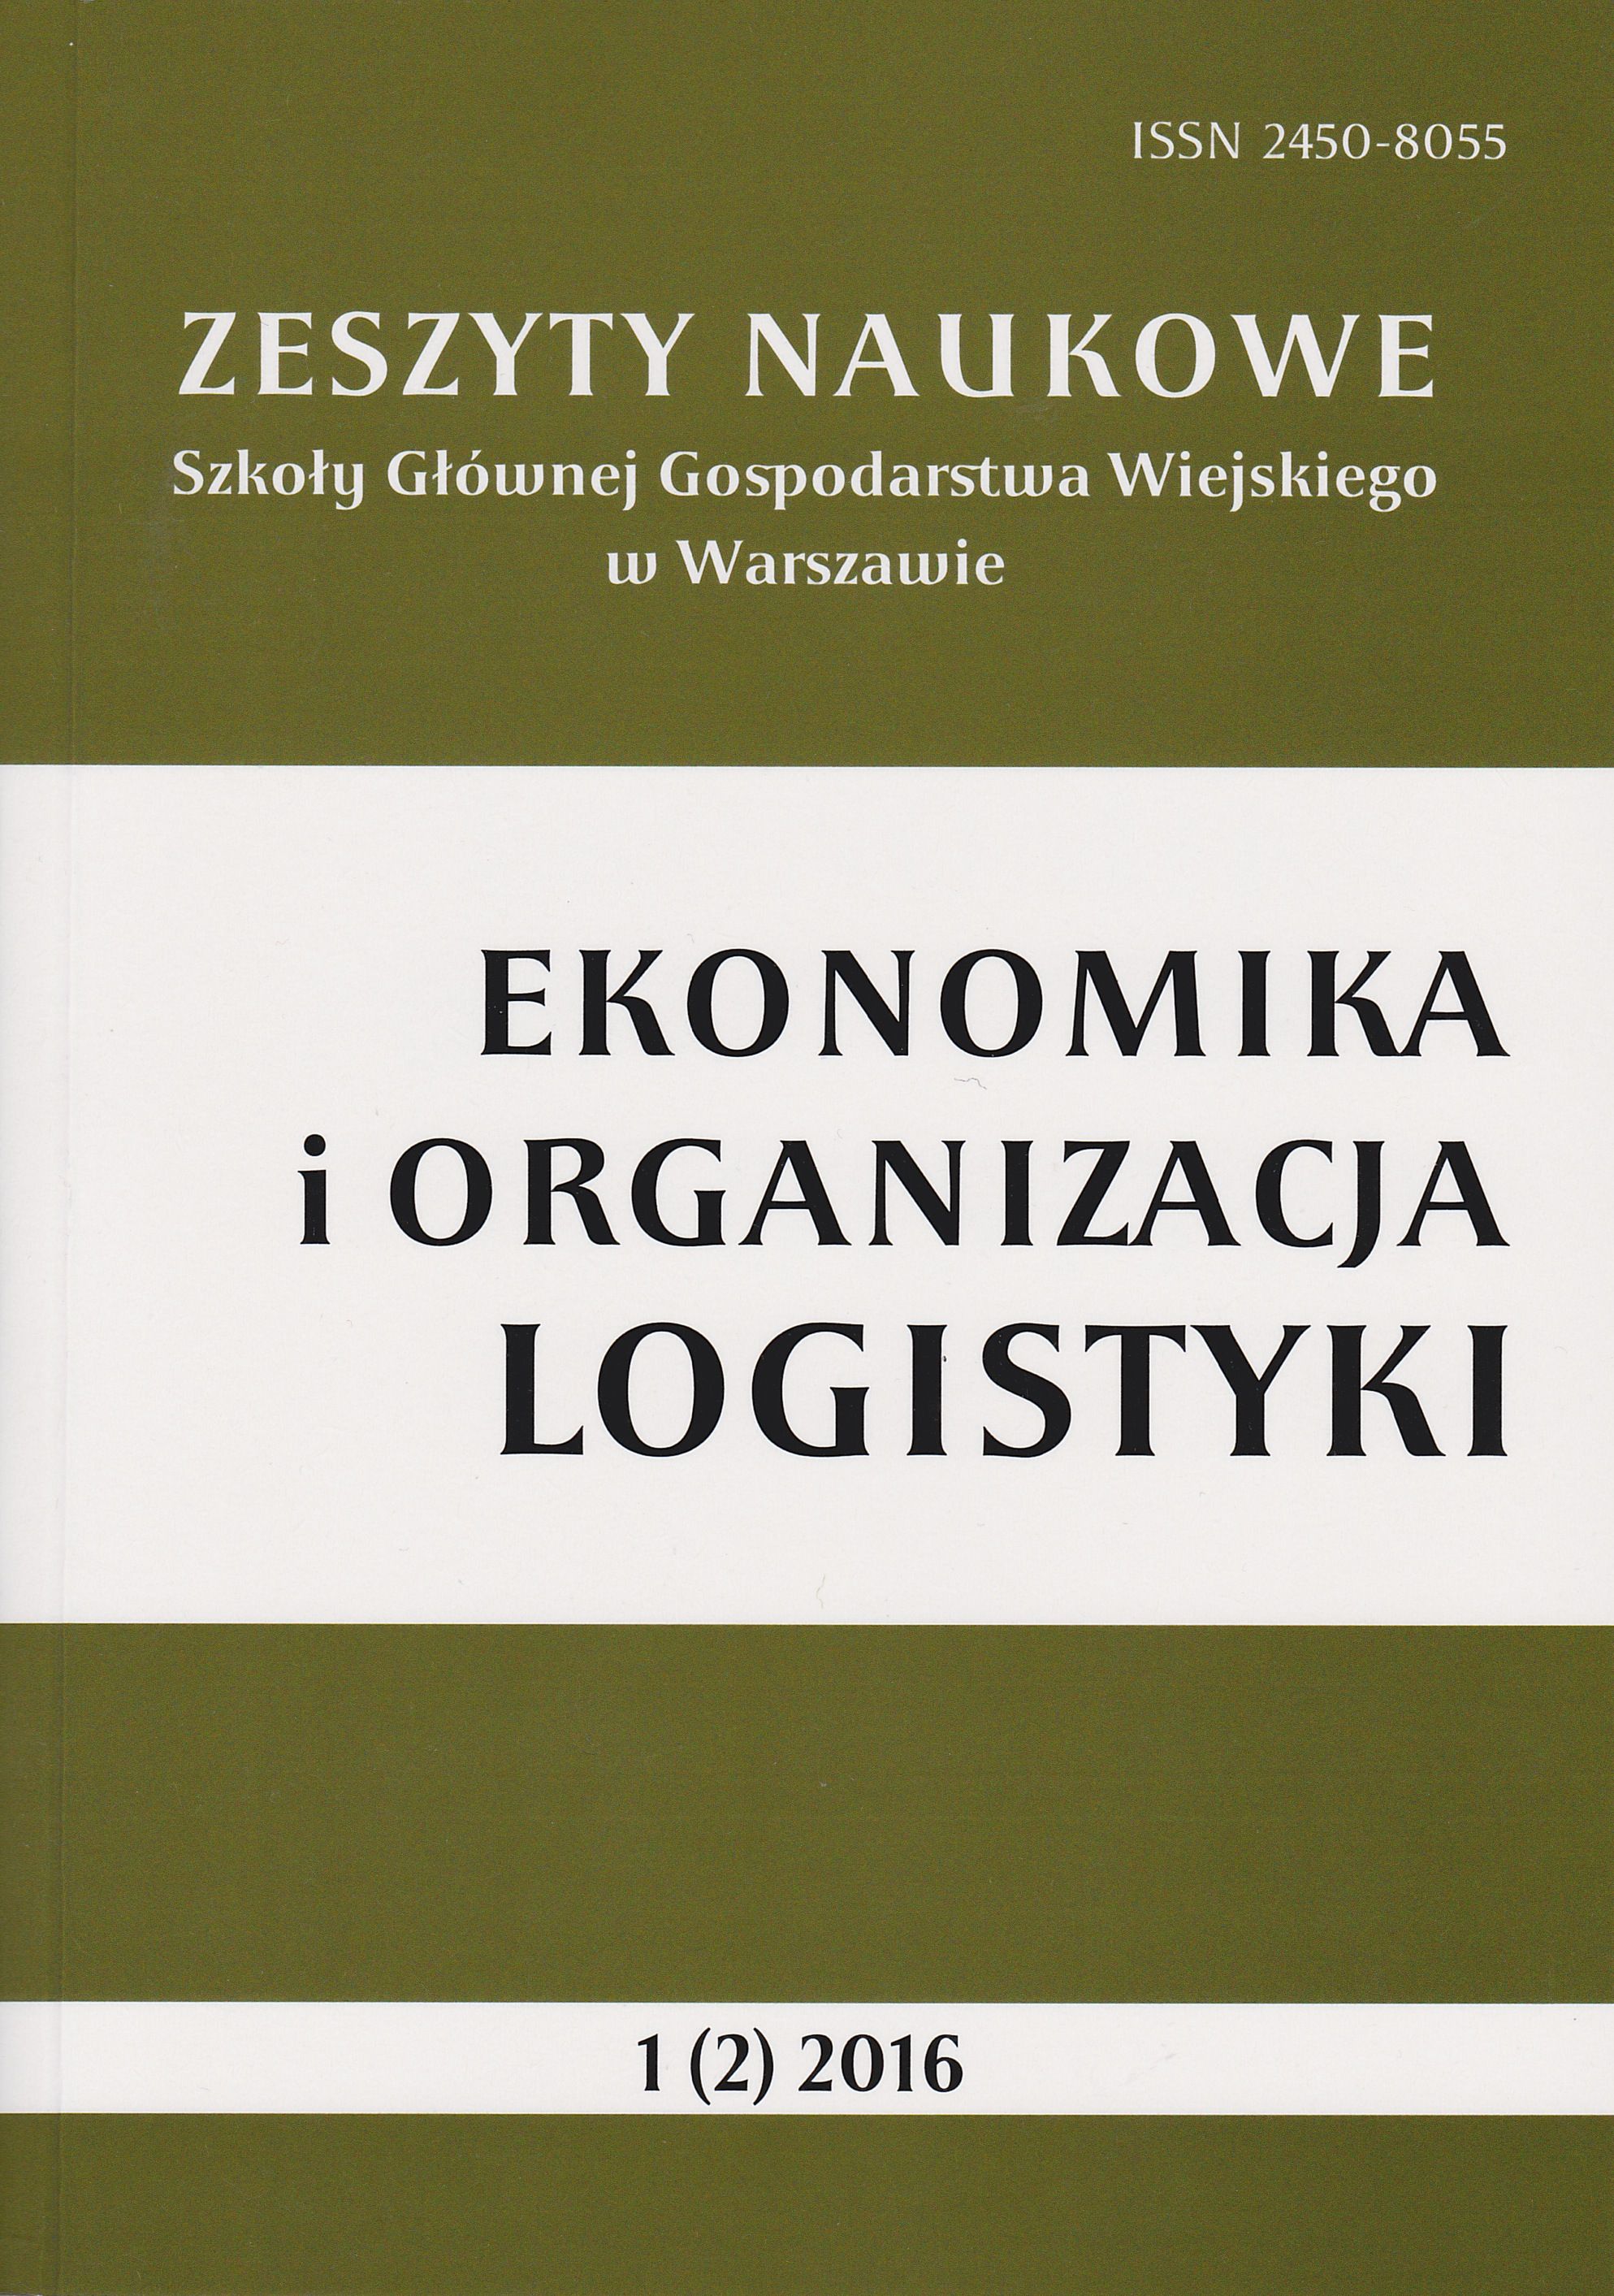 Corporate social responsibility in the management 
of logistics Cover Image